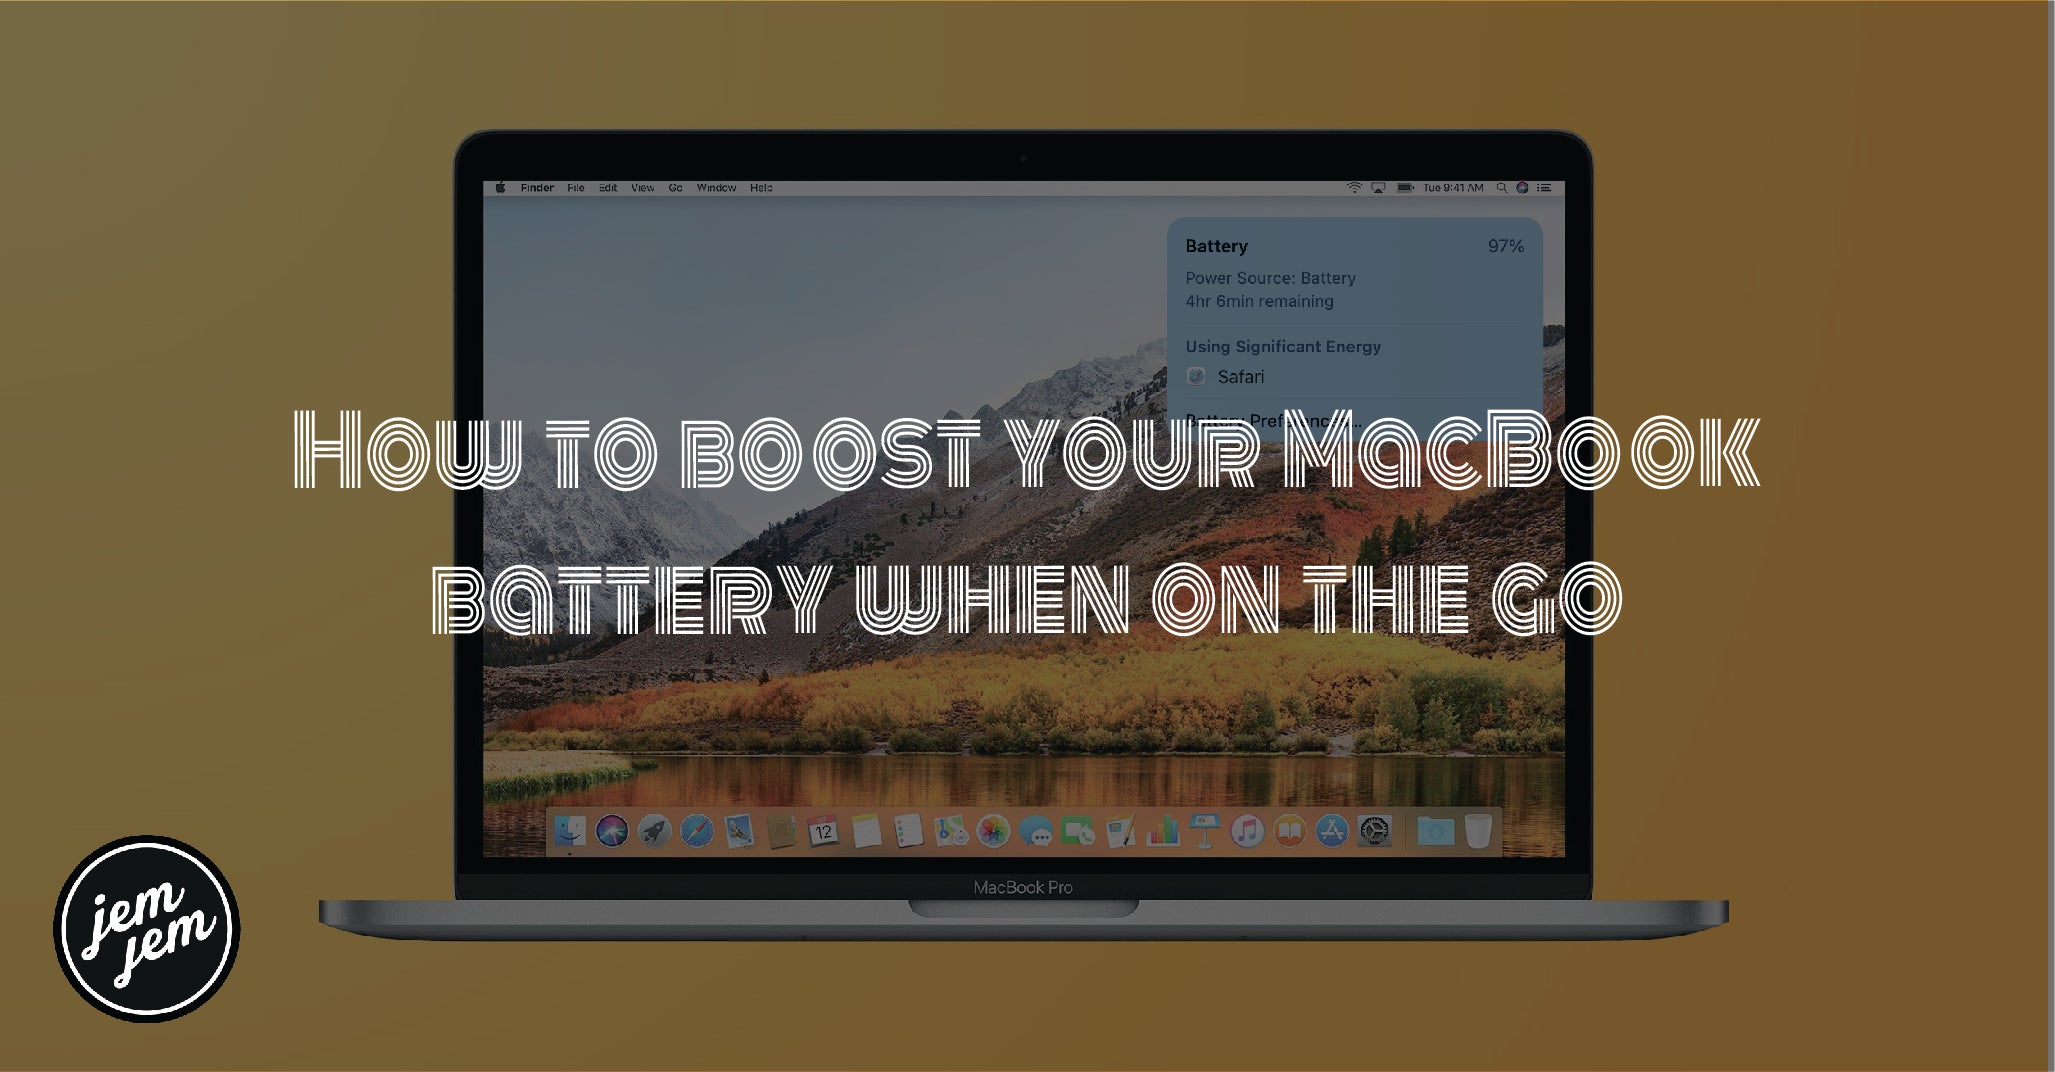 How to boost your MacBook battery when on the go